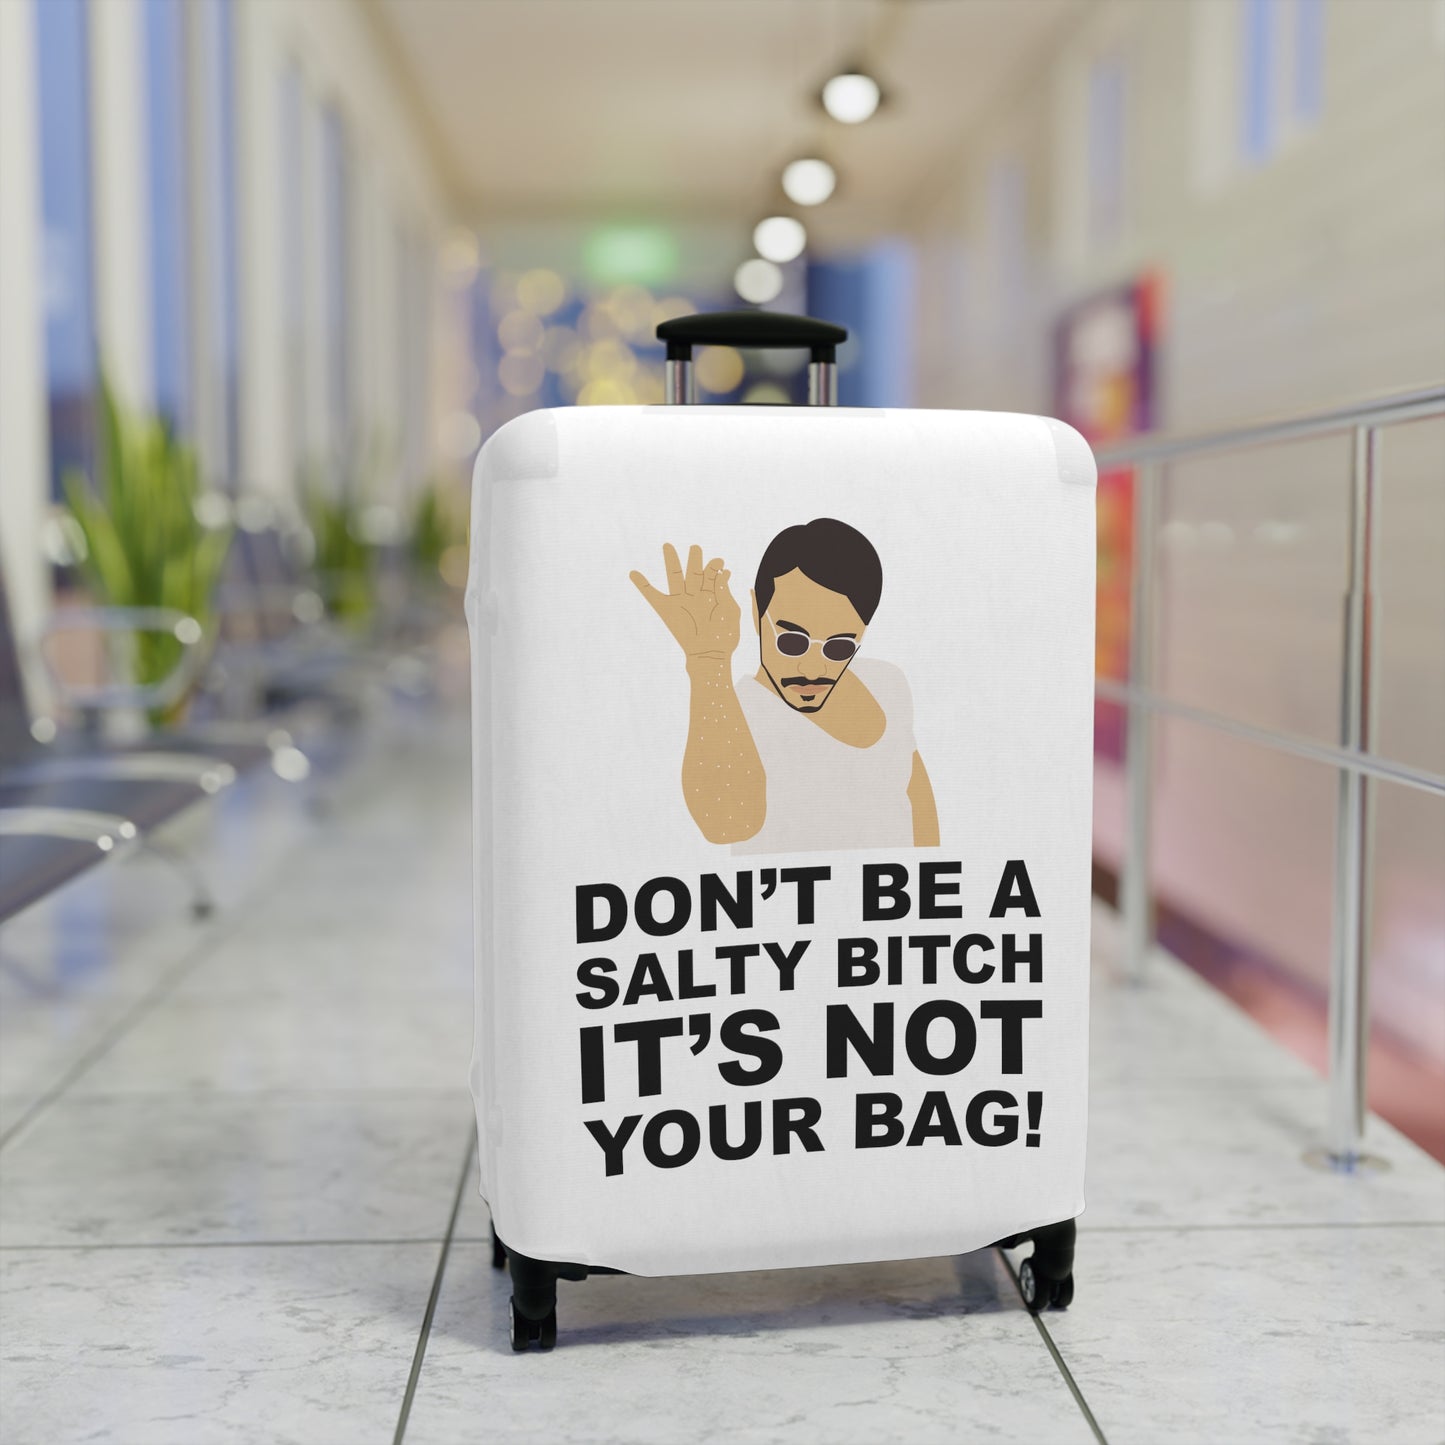 Don't Be A Salty Bitch It's Not Your Bag!--Luggage Cover